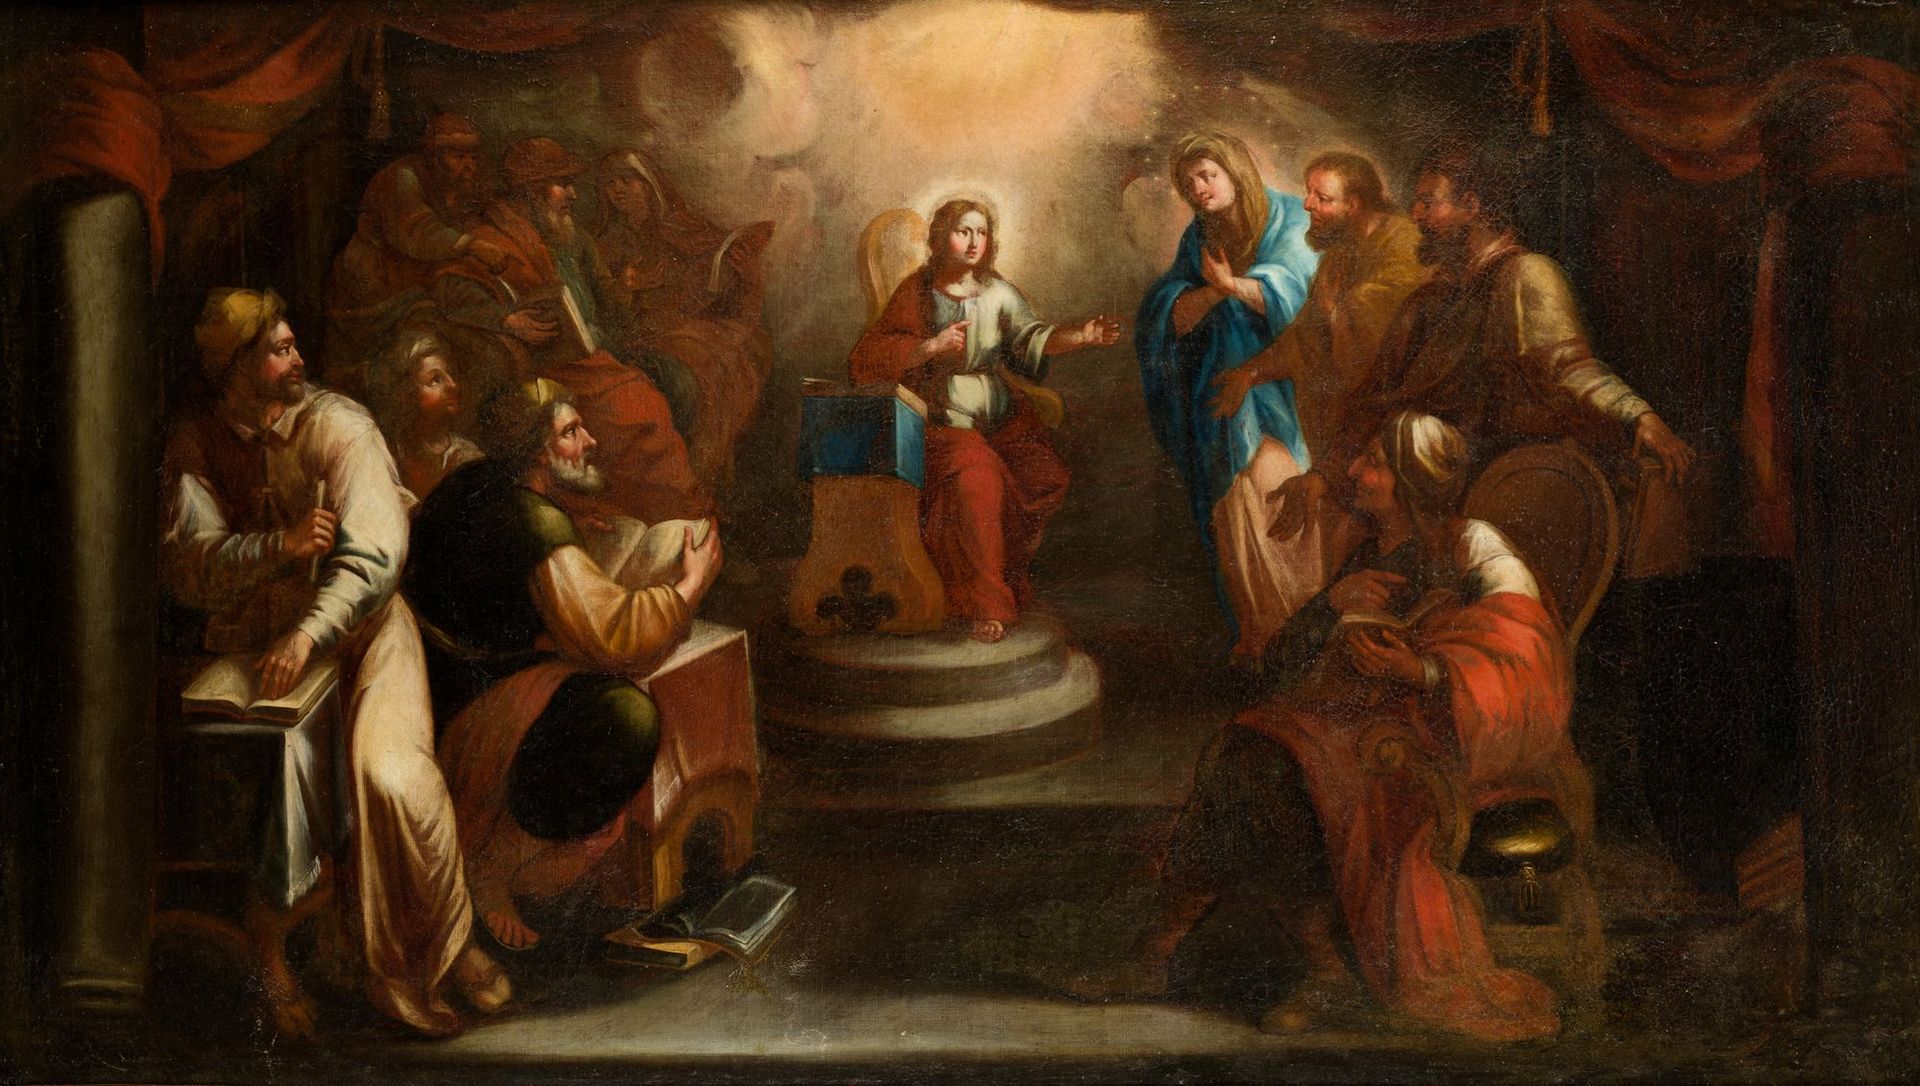 SPANISH SCHOOL (Late C. 17th - Early C. 18th) "The Child Jesus lost and found in&hellip;